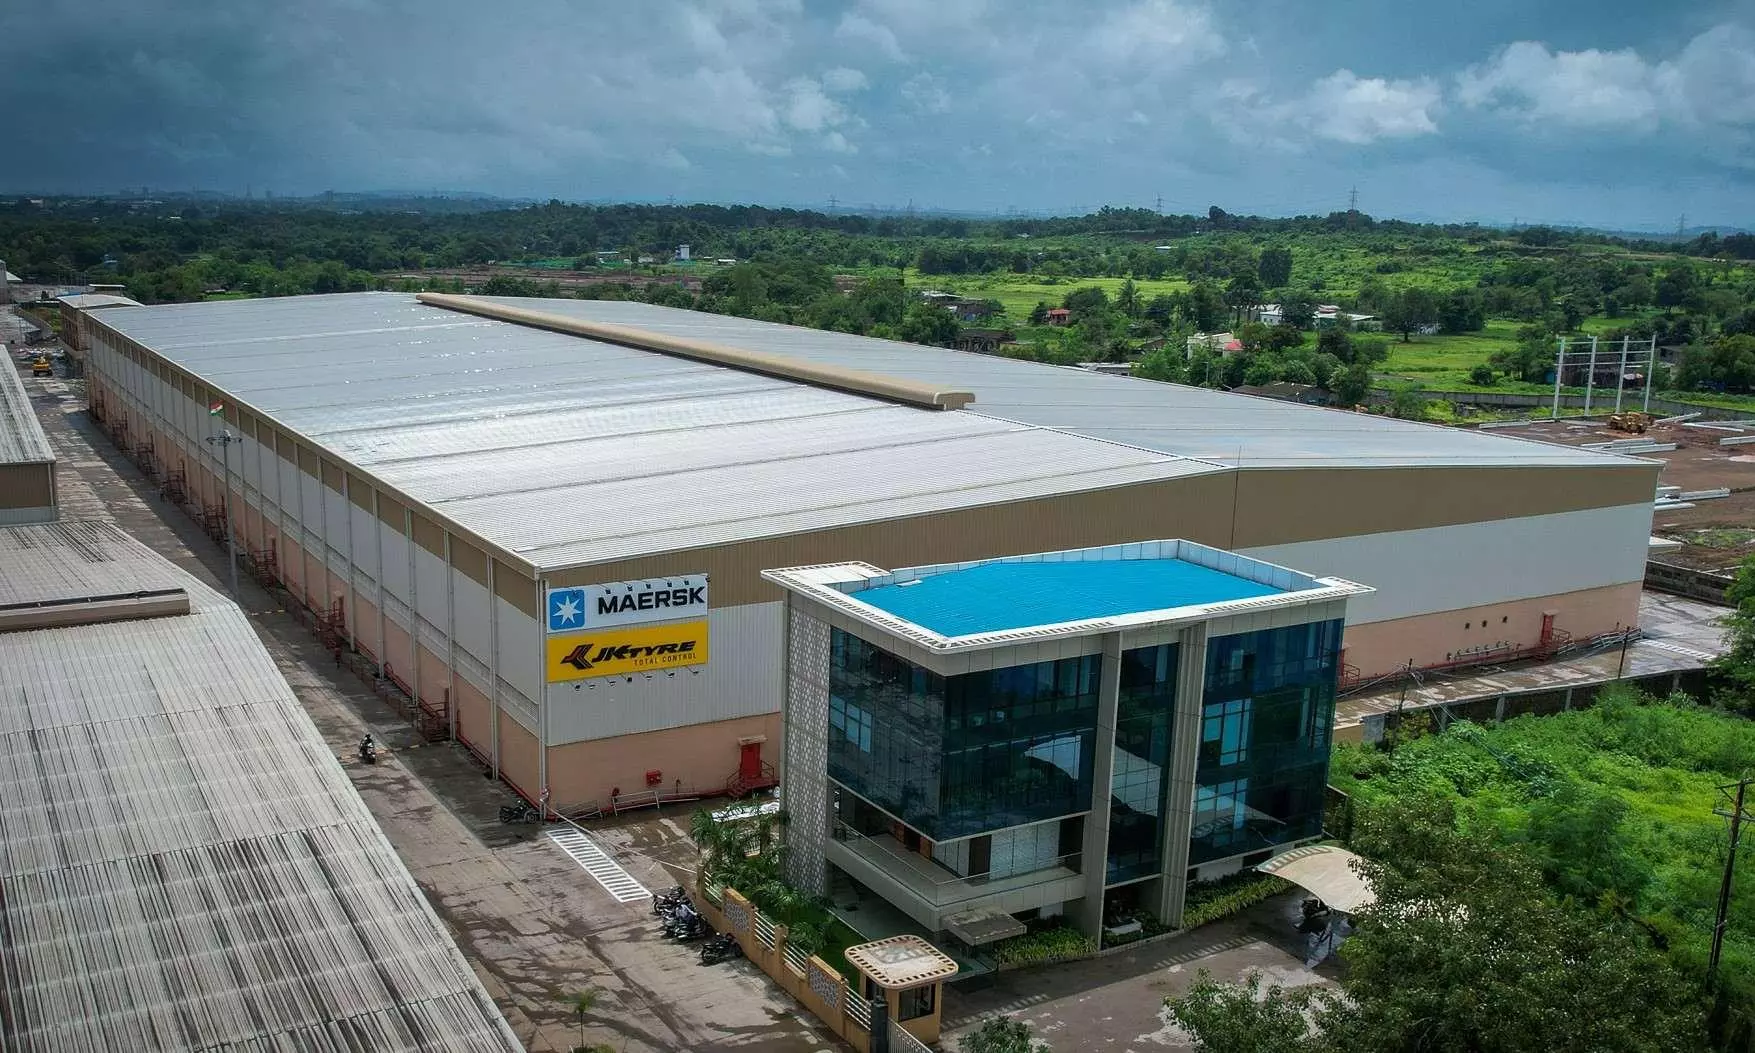 Maersk opens new warehouse in Bhiwandi with JK Tyre as anchor customer